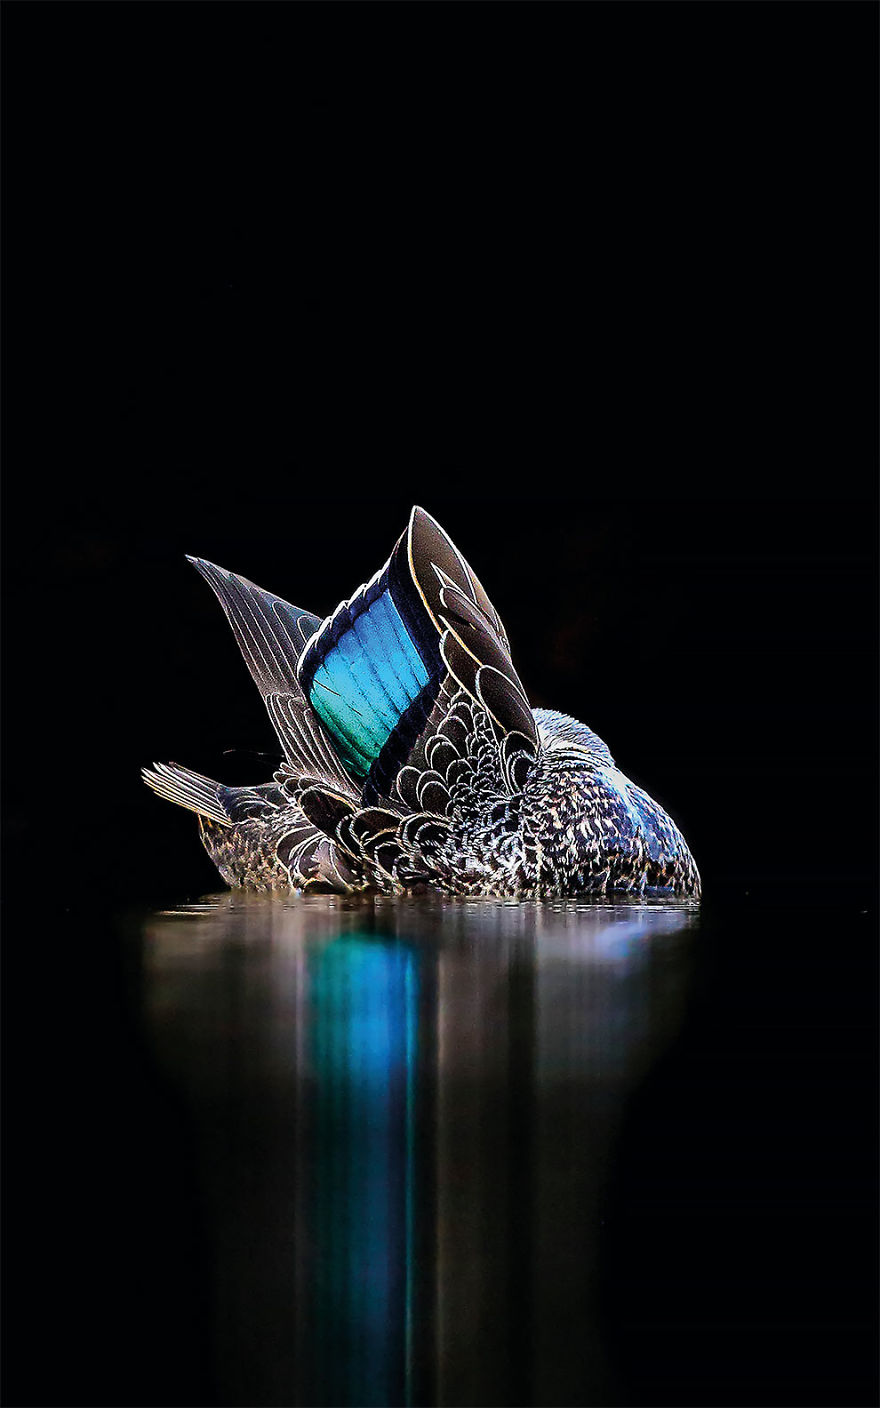 The Speculum By Georgina Steytler. Australia. Gold Award Winner In The Creative Imagery Category